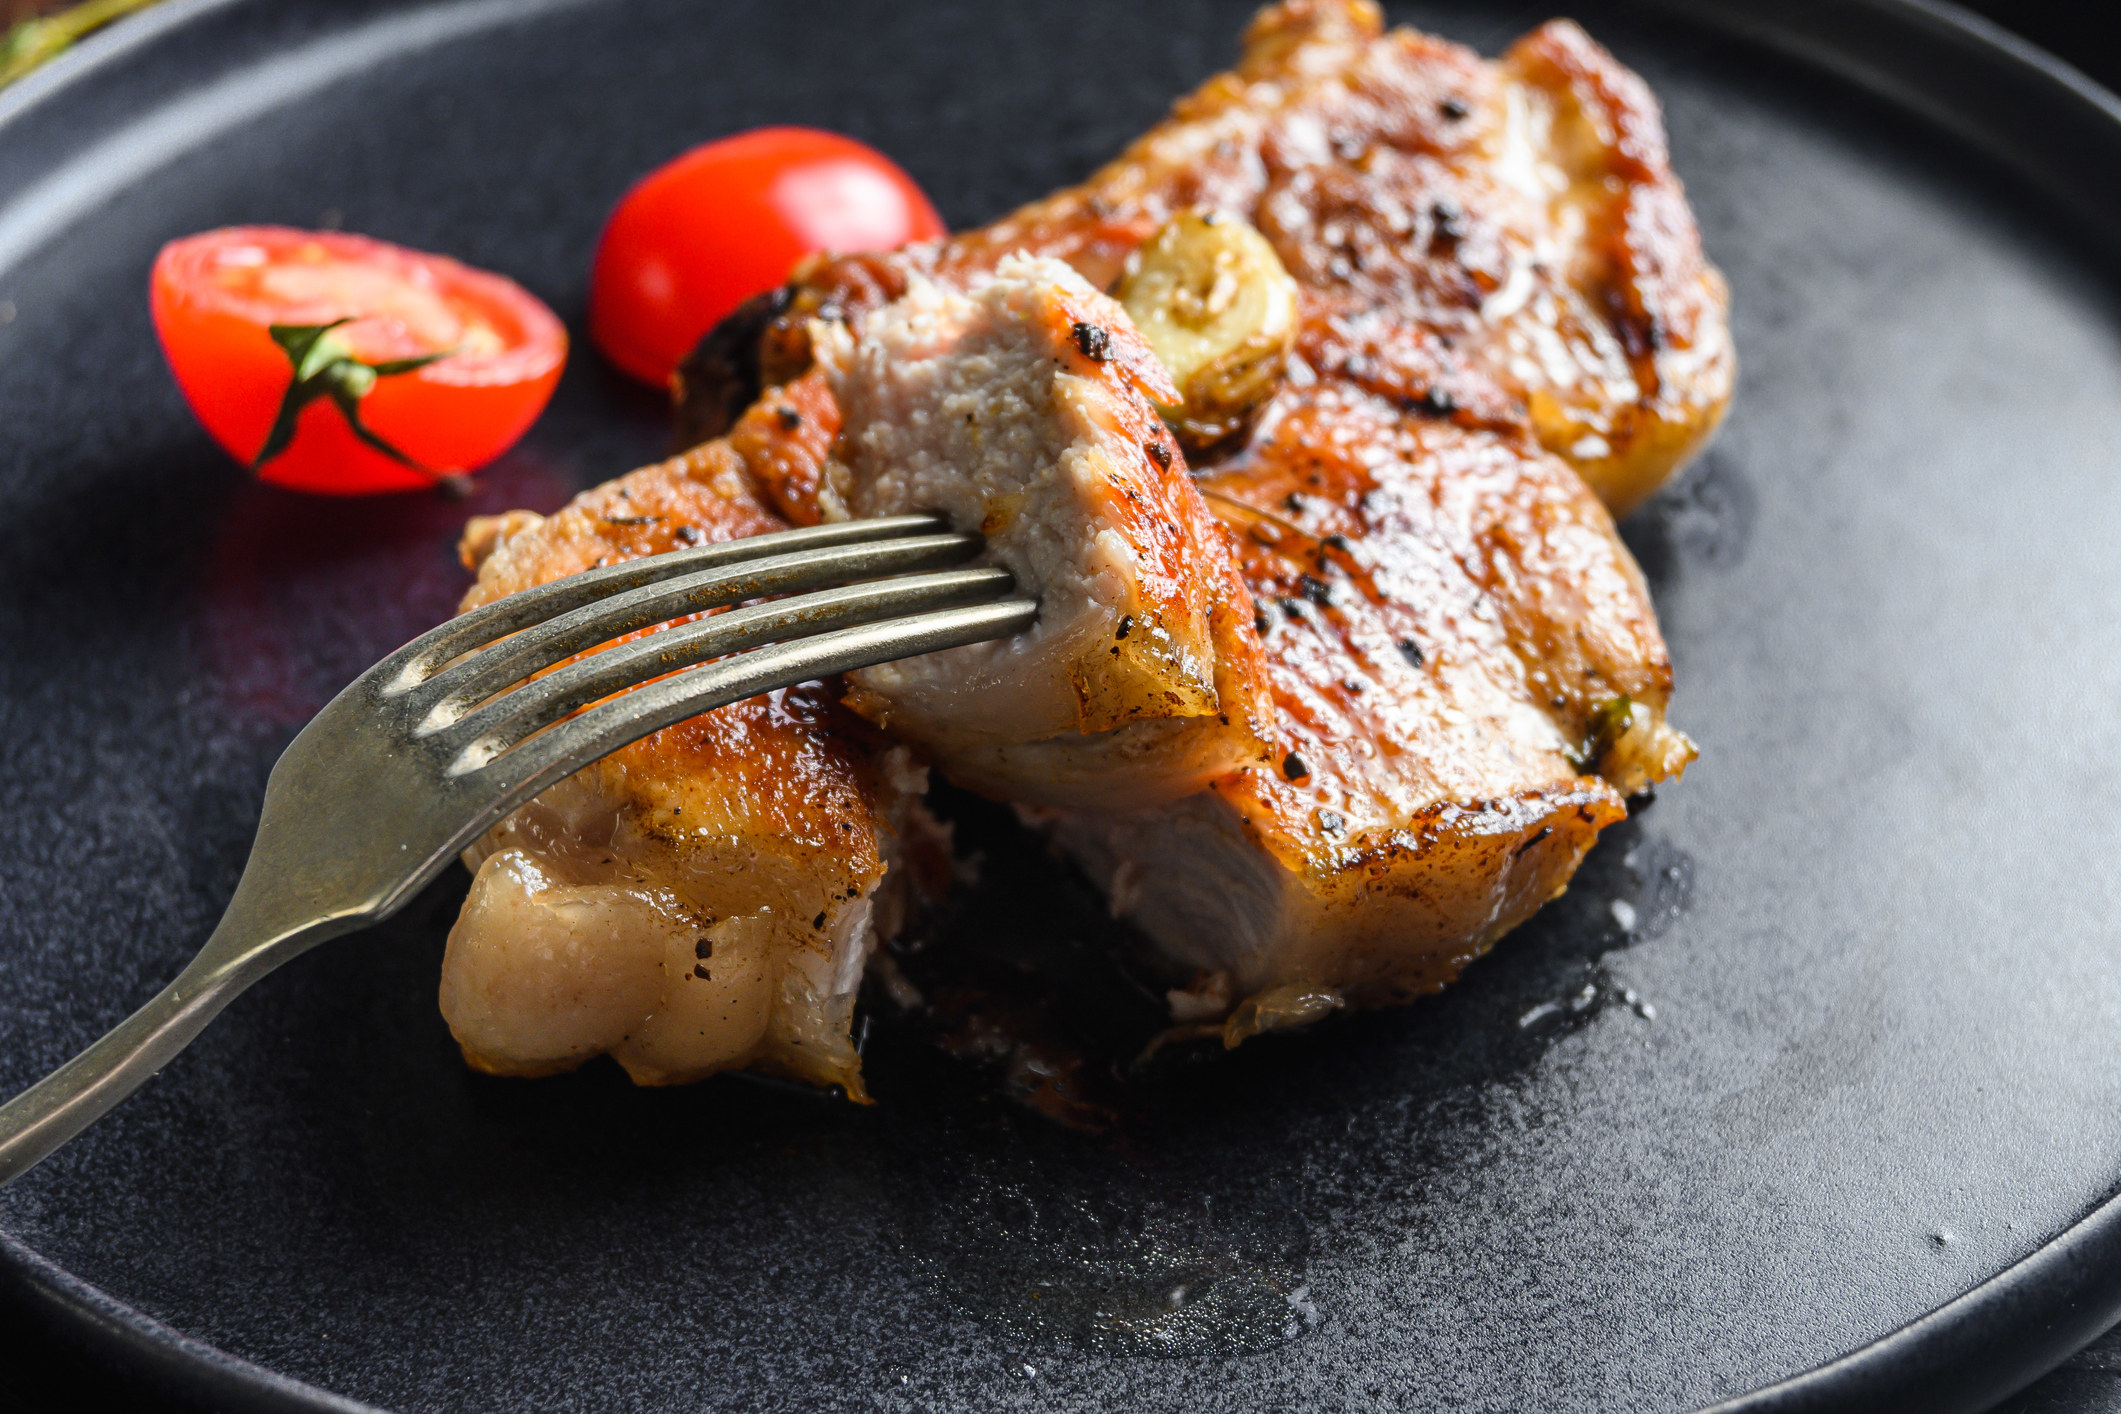 Dish of grilled pork chop with tomatoes.